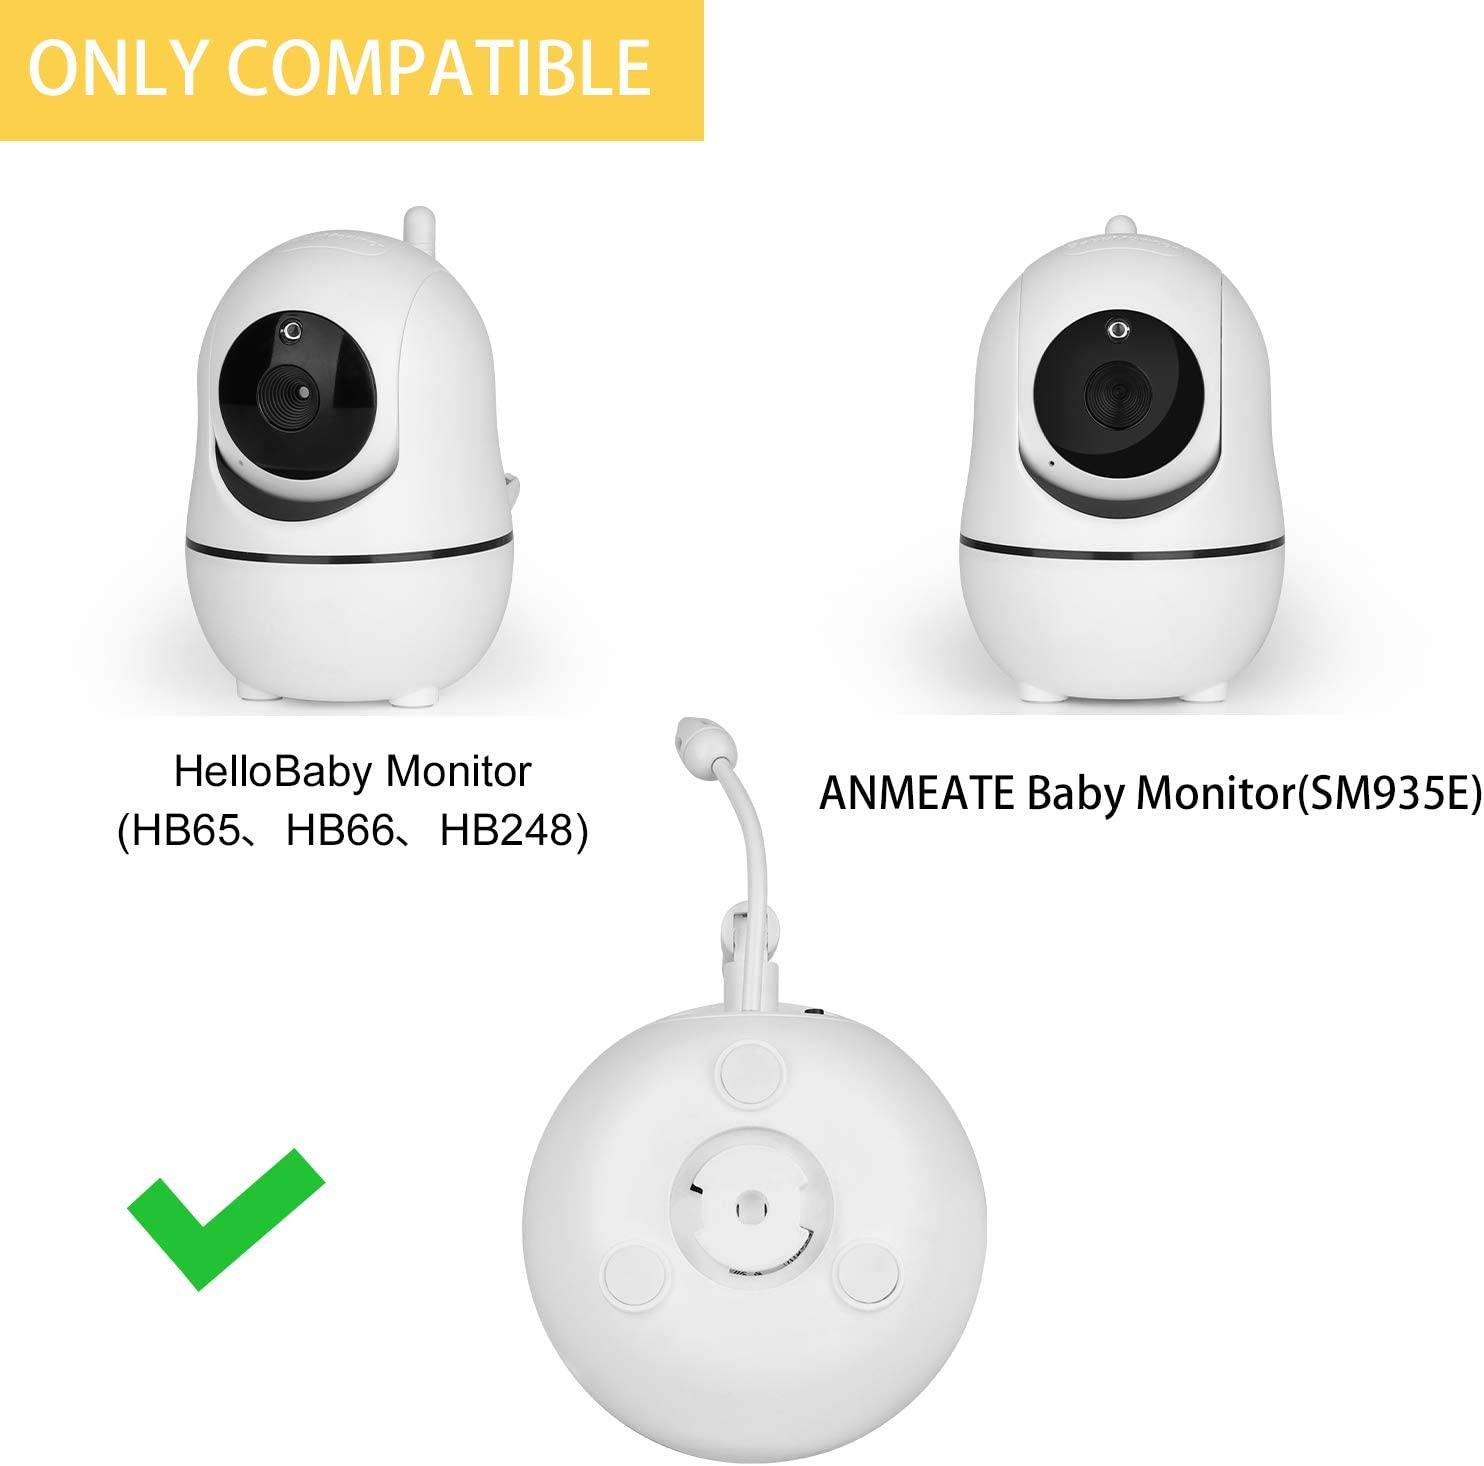 iTODOS Gooseneck Baby Monitor Holder Compatible with HelloBaby HB65/HB66/HB248,ANMEATE  SM935E Baby Monitor Camera,27inch Length Stable and Durable Flexible Arm  White